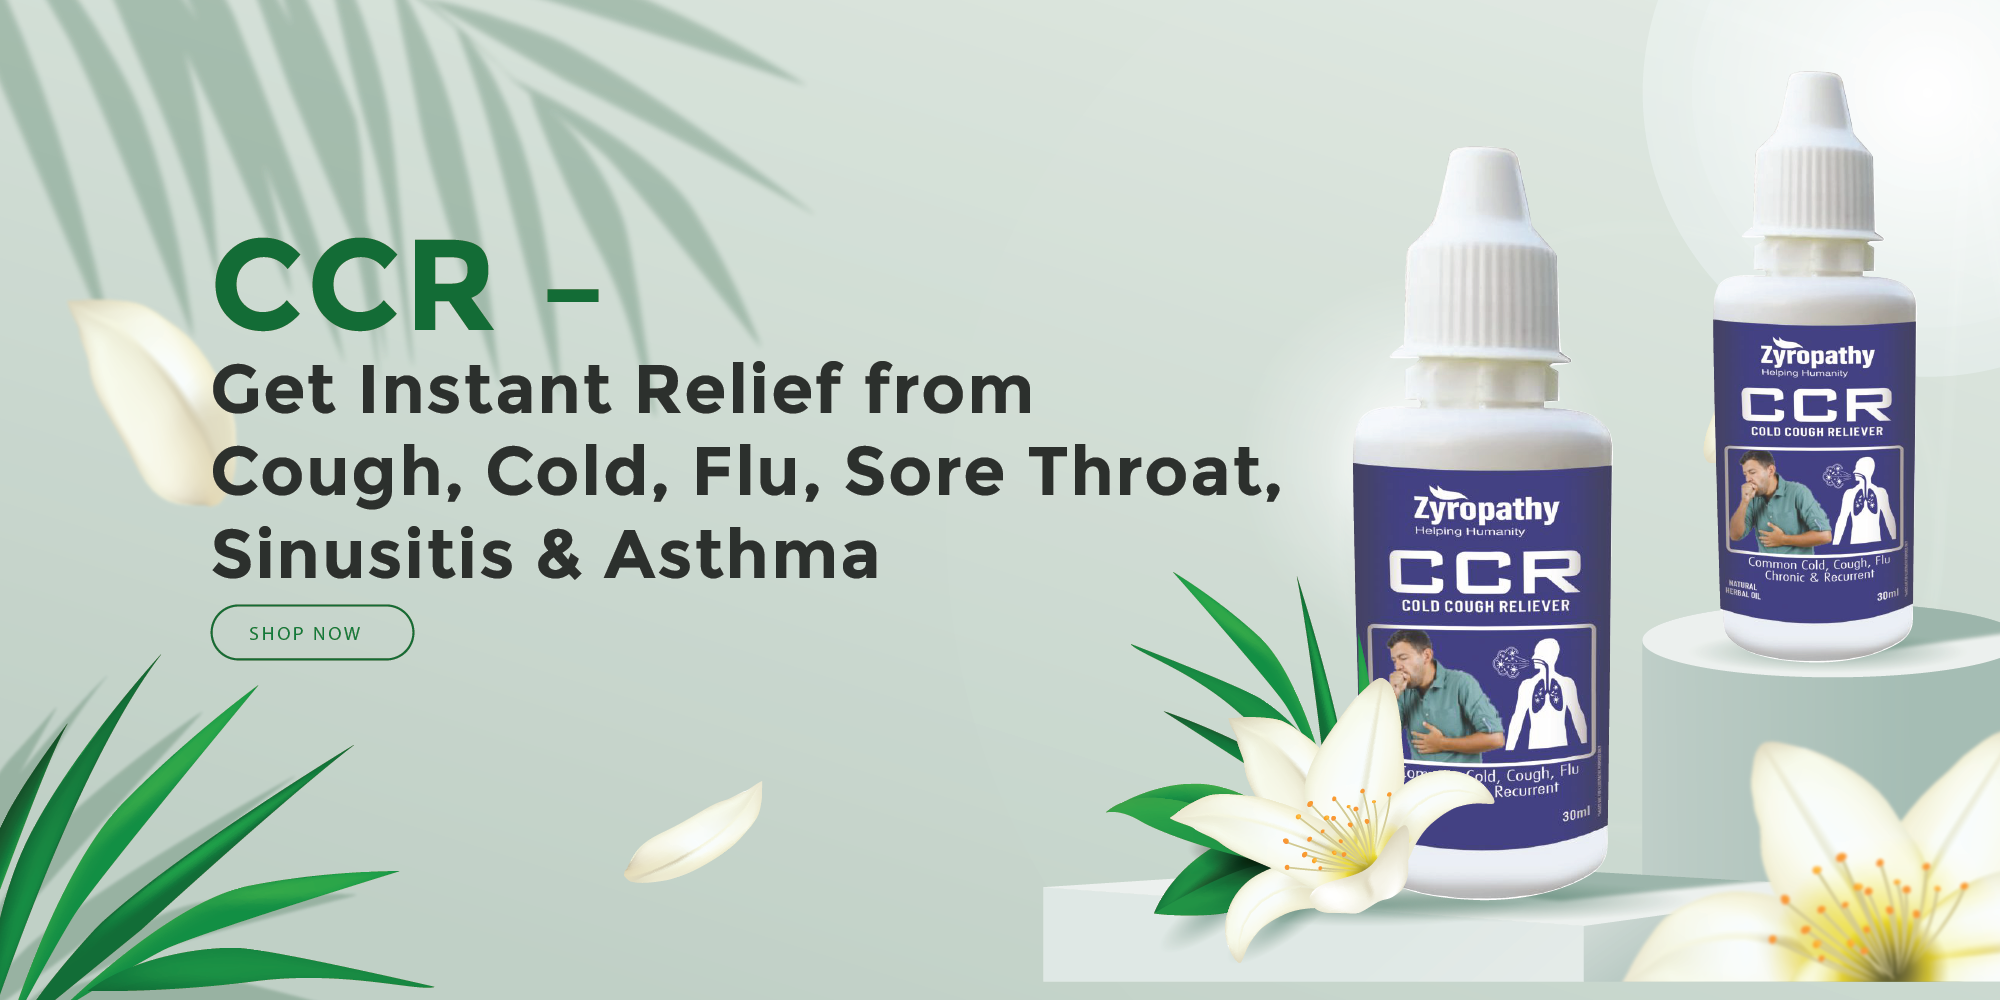 CCR - Instant relief from Cough, Cold, Flu, Sore Throat, Sinusitis, and Asthma